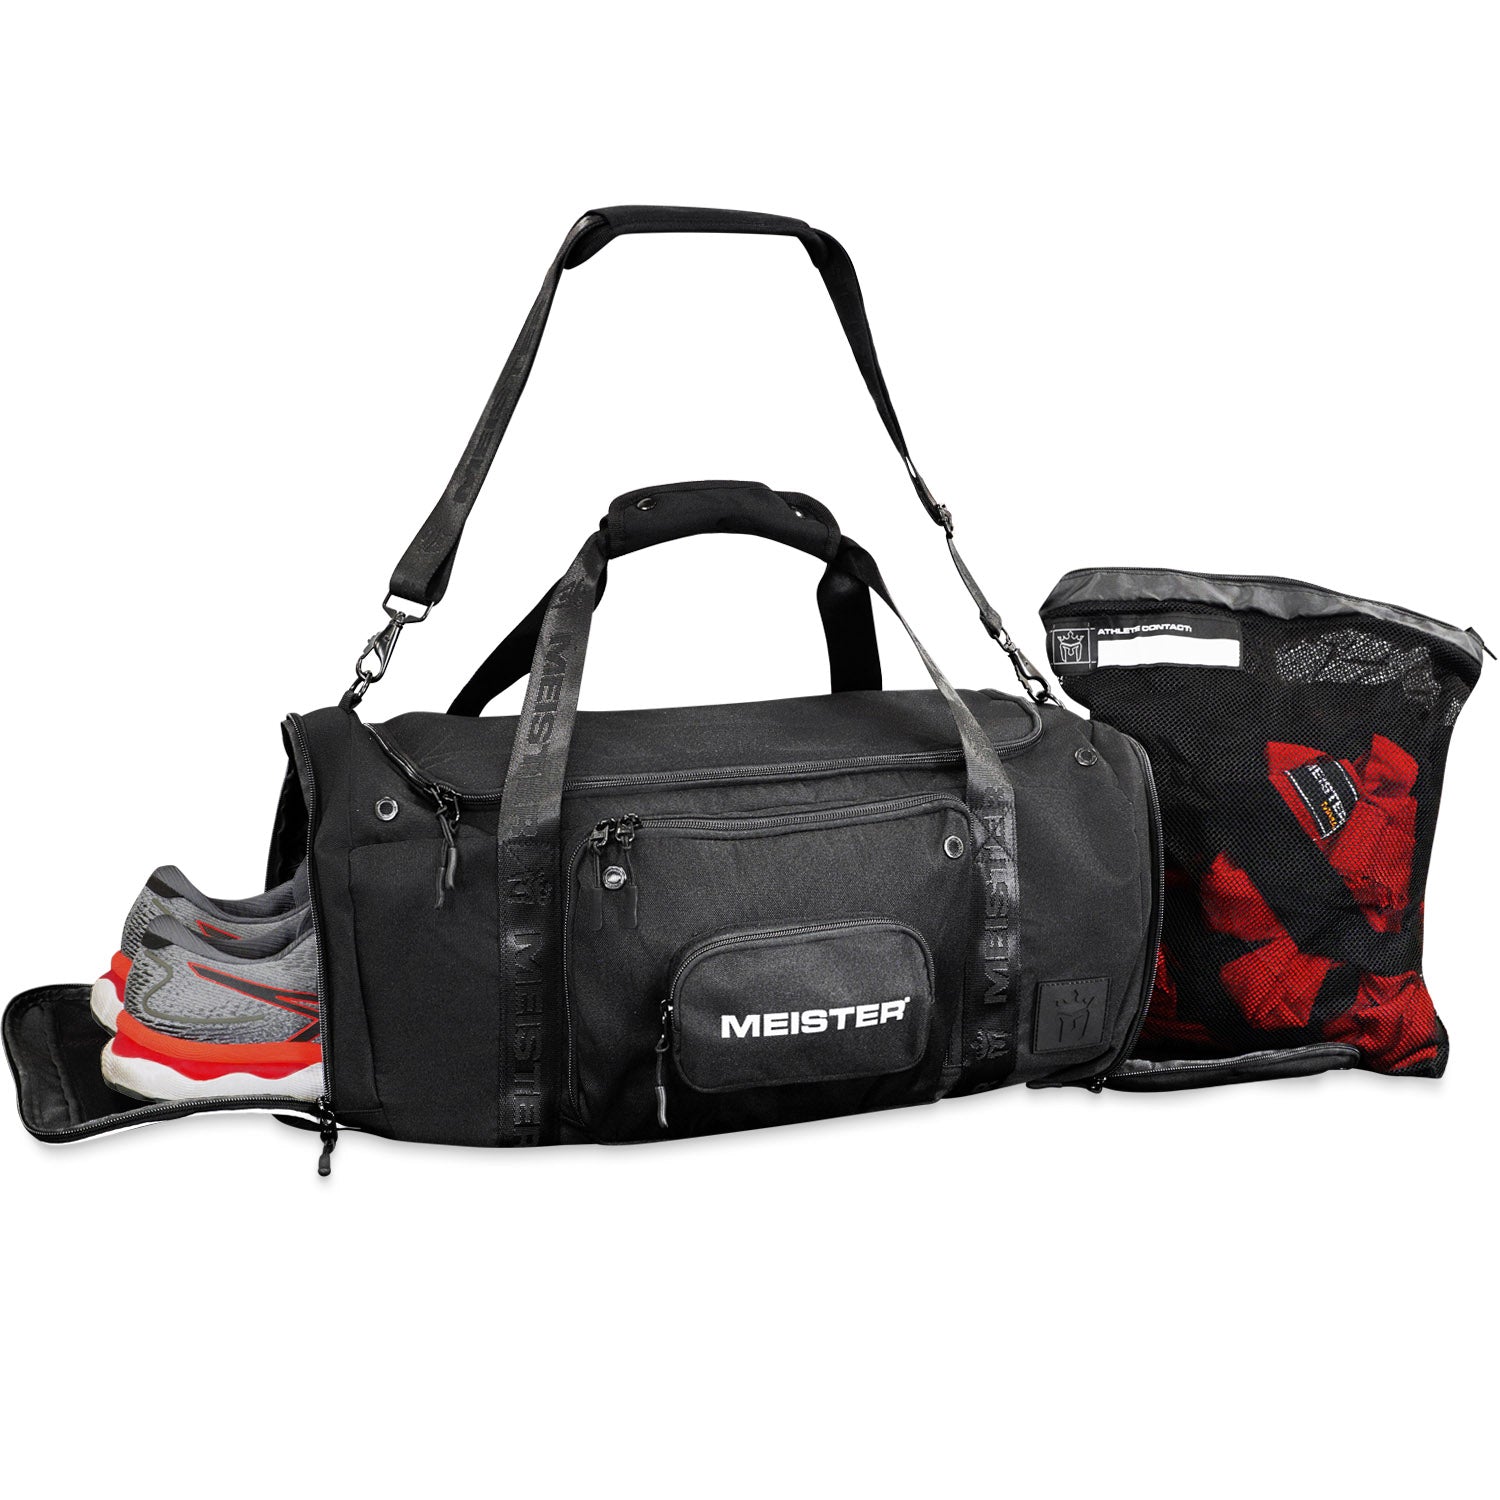 Brawler Gym Bag for Fighters w/ Zip-Out Hand Wrap Wash Bag | Meister